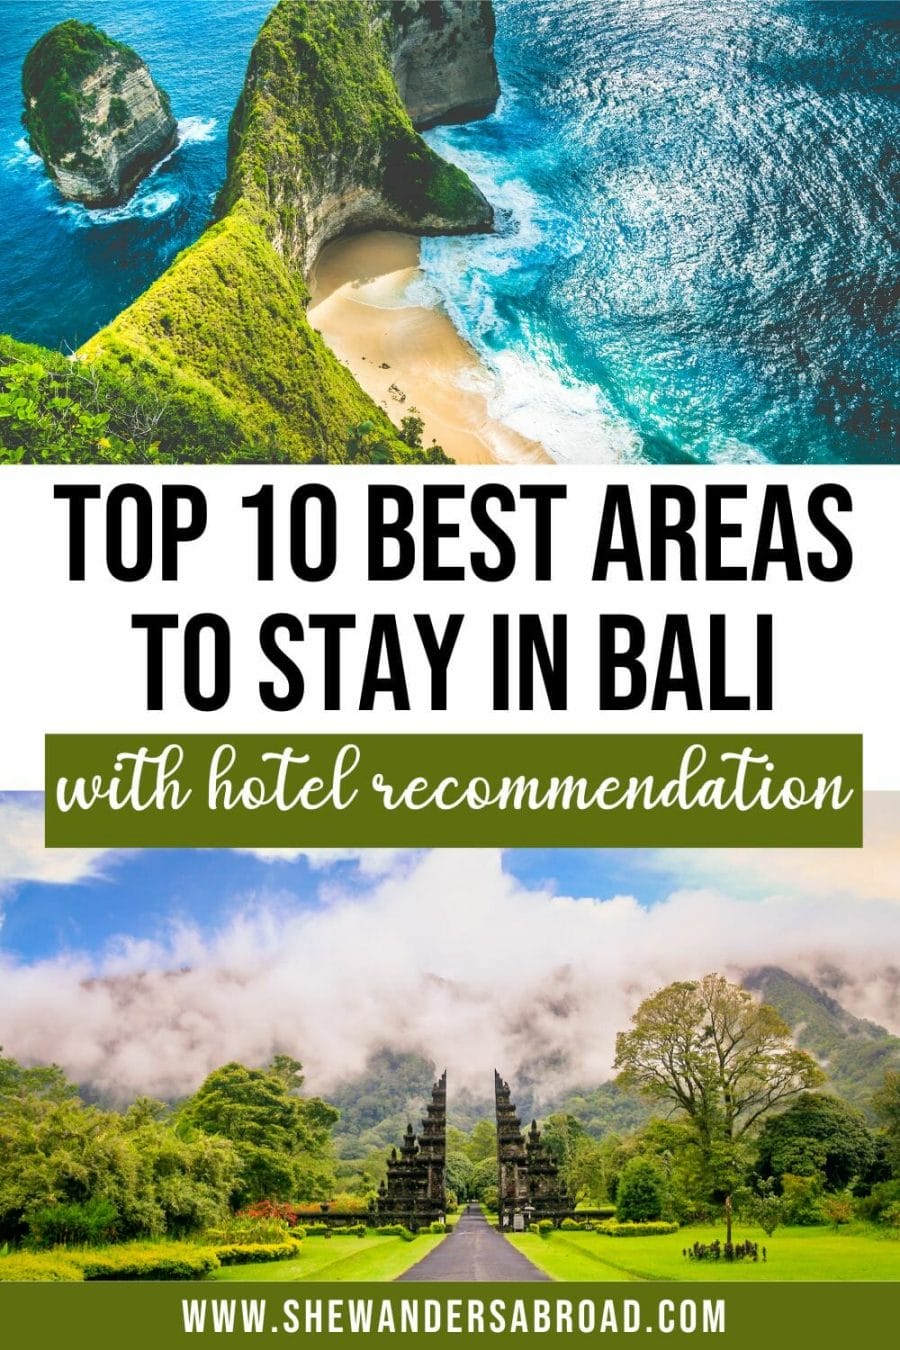 Where to Stay in Bali: 10 Best Areas & Hotels